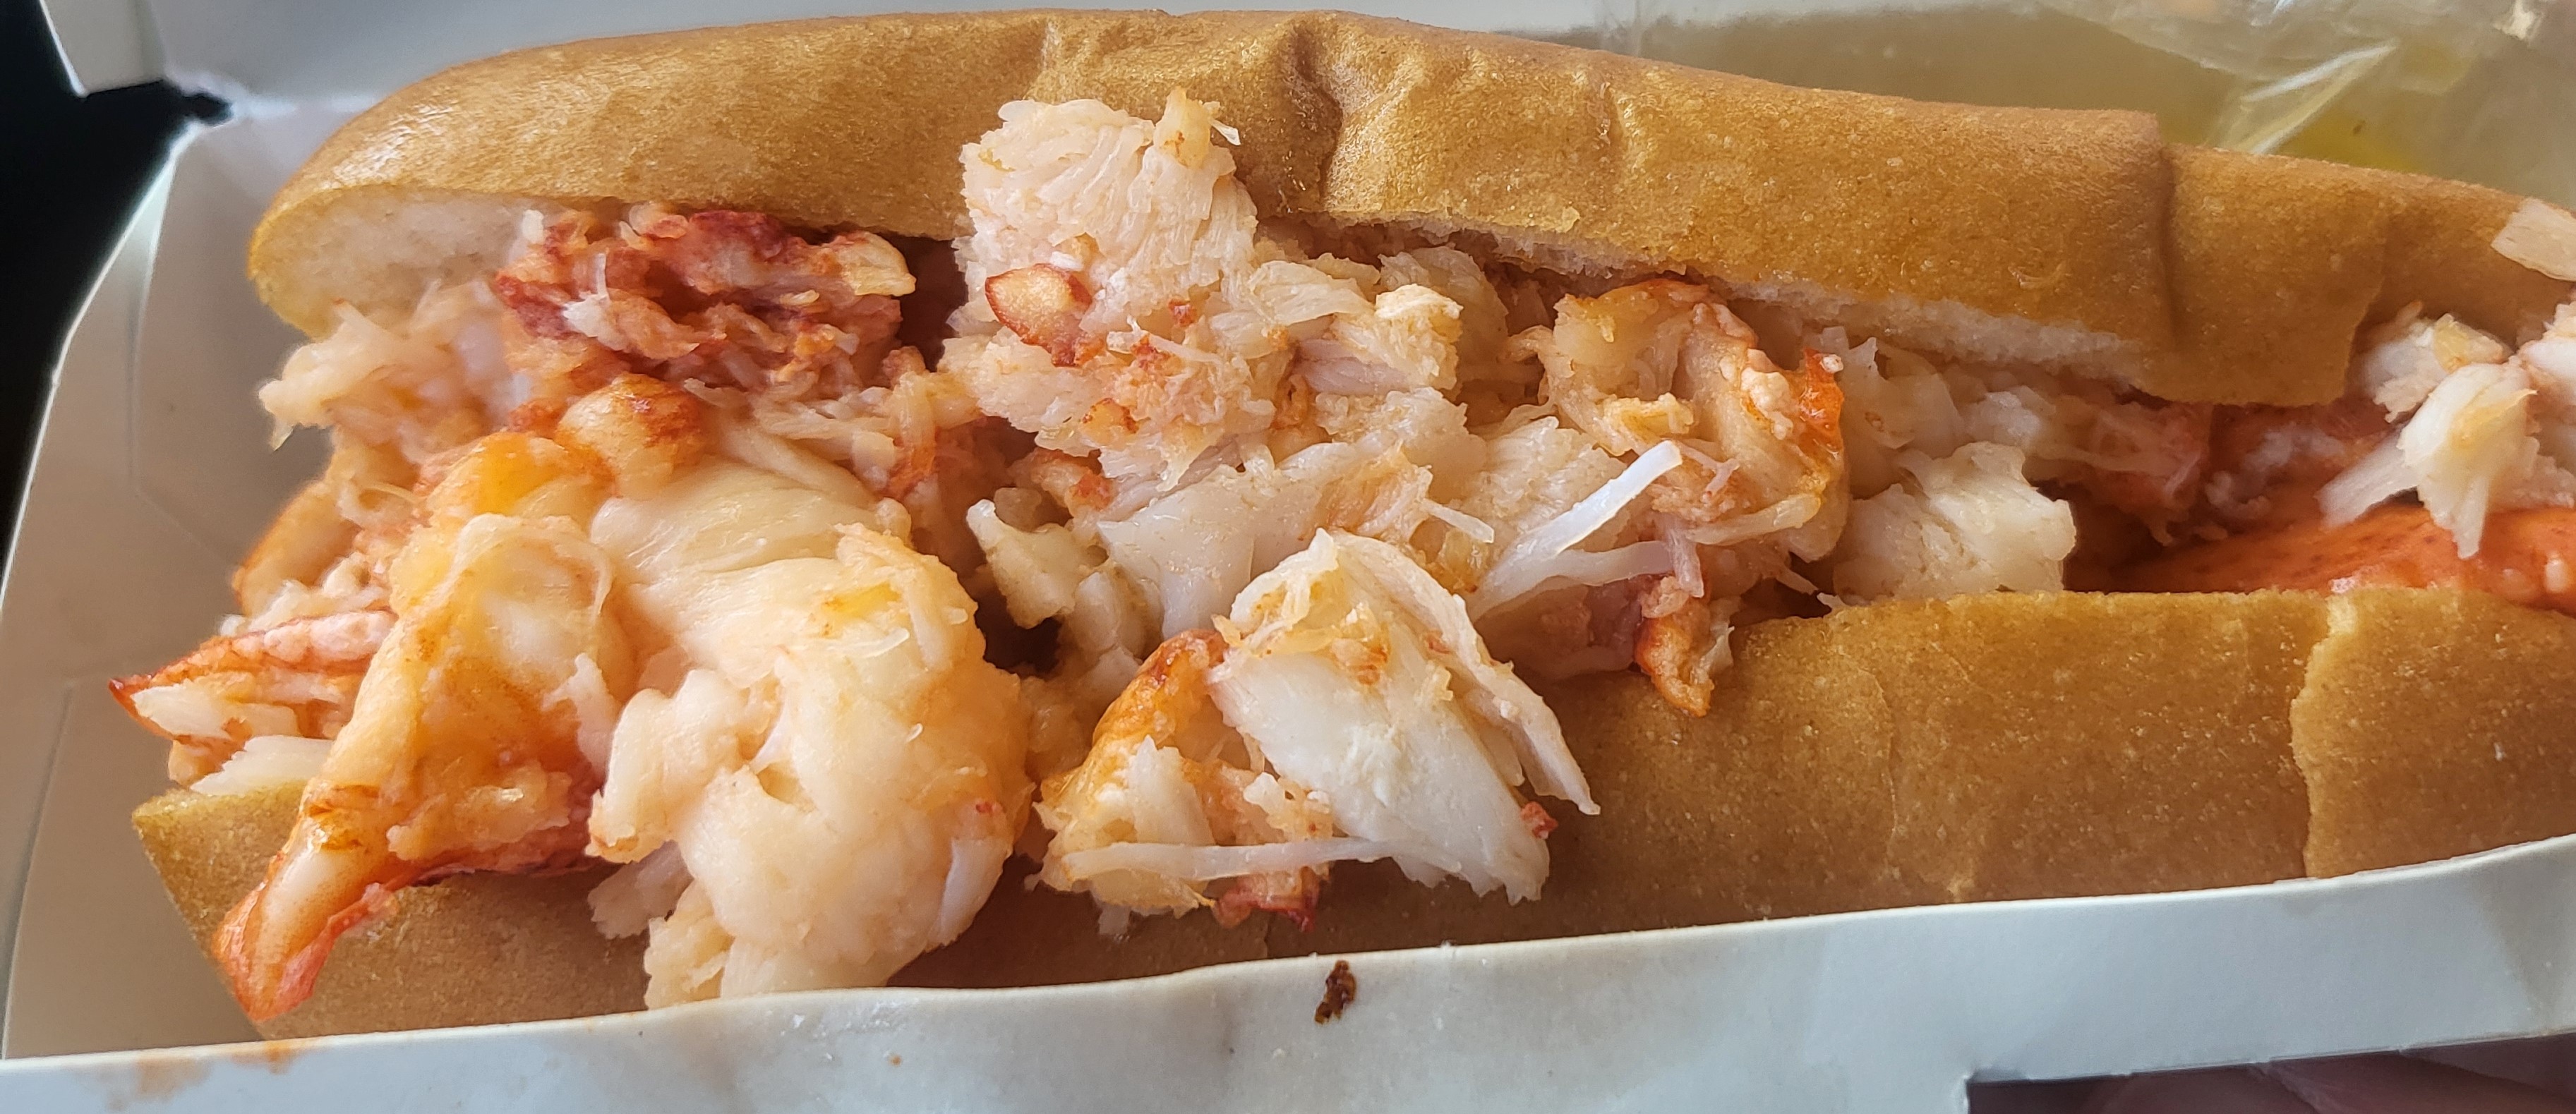 Warm lobster roll at Angie's Lobster in Surprise, Ariz.